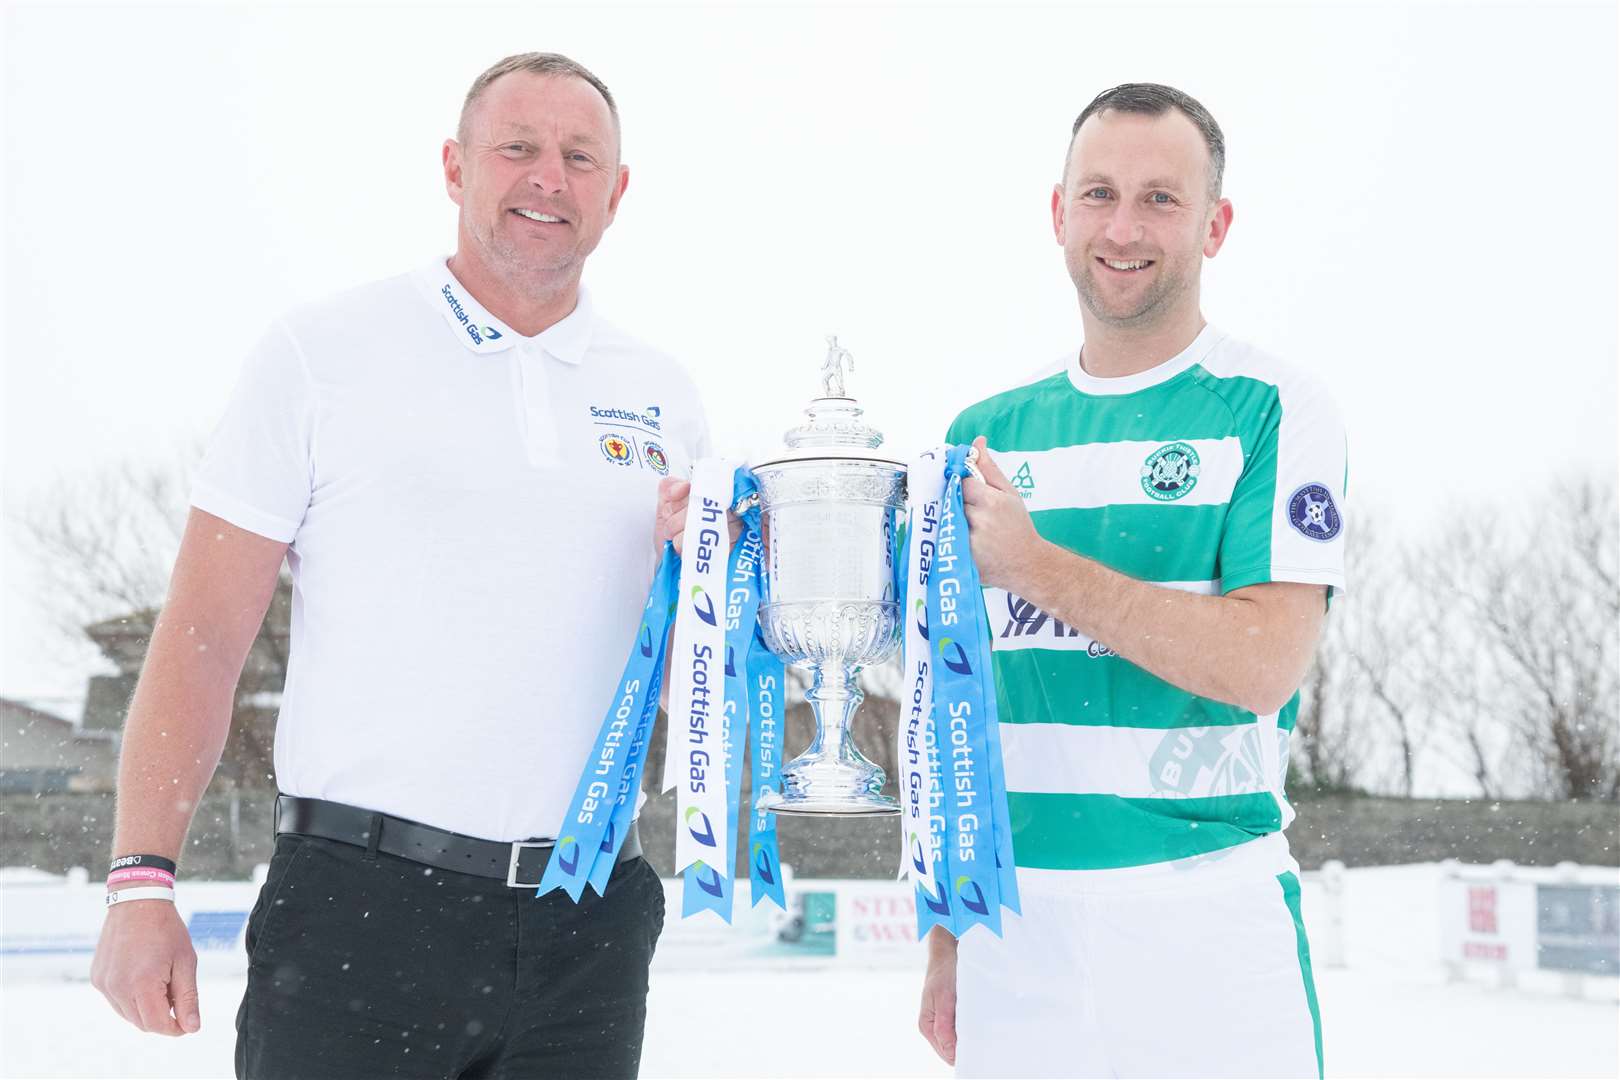 Former Celtic goalkeeper and three time Scottish Cup winner Rab Douglas (left) and Buckie Thistle striker John McLeod...The Scottish Gas Scottish Cup arrives at a snow-covered Victoria Park ahead of Buckie Thistle's fouth round match with Glasgow Celtic...Picture: Daniel Forsyth..